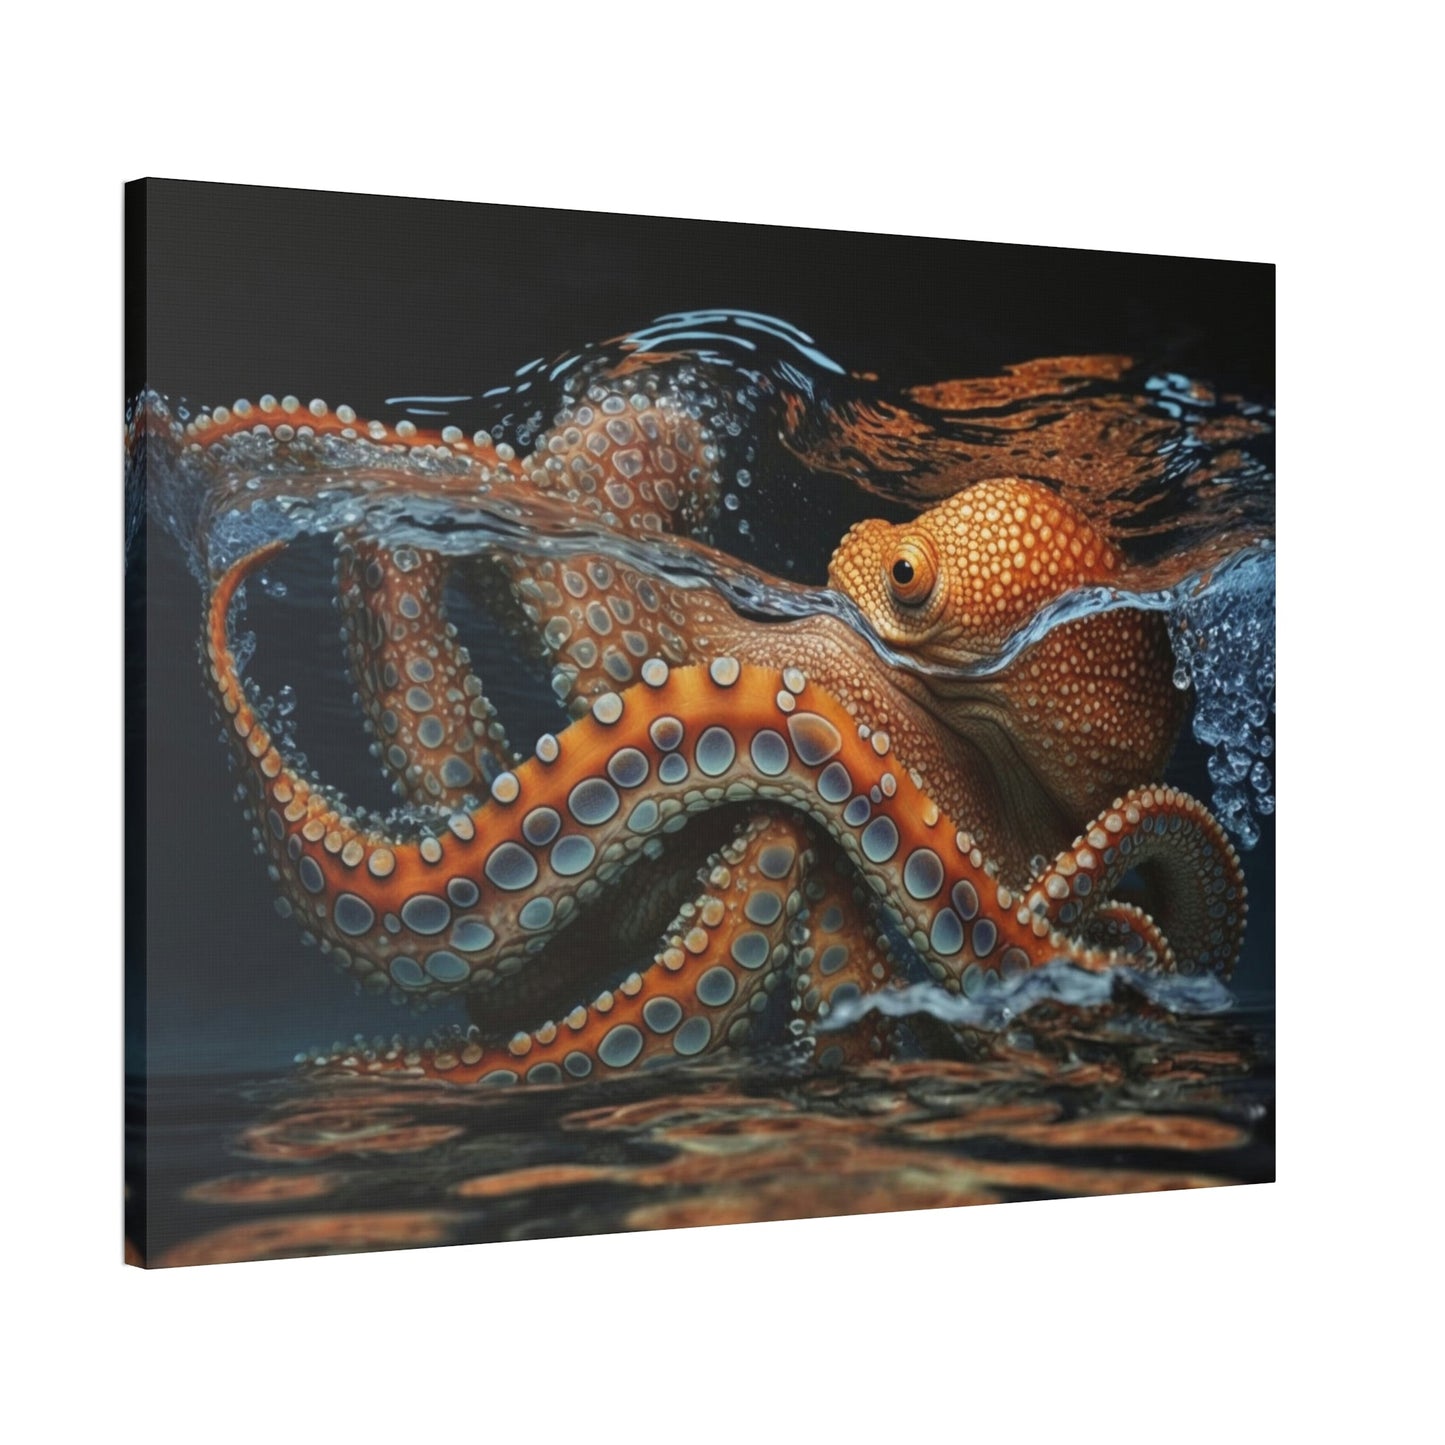 Octopus Oasis: A Colorful Canvas Creation